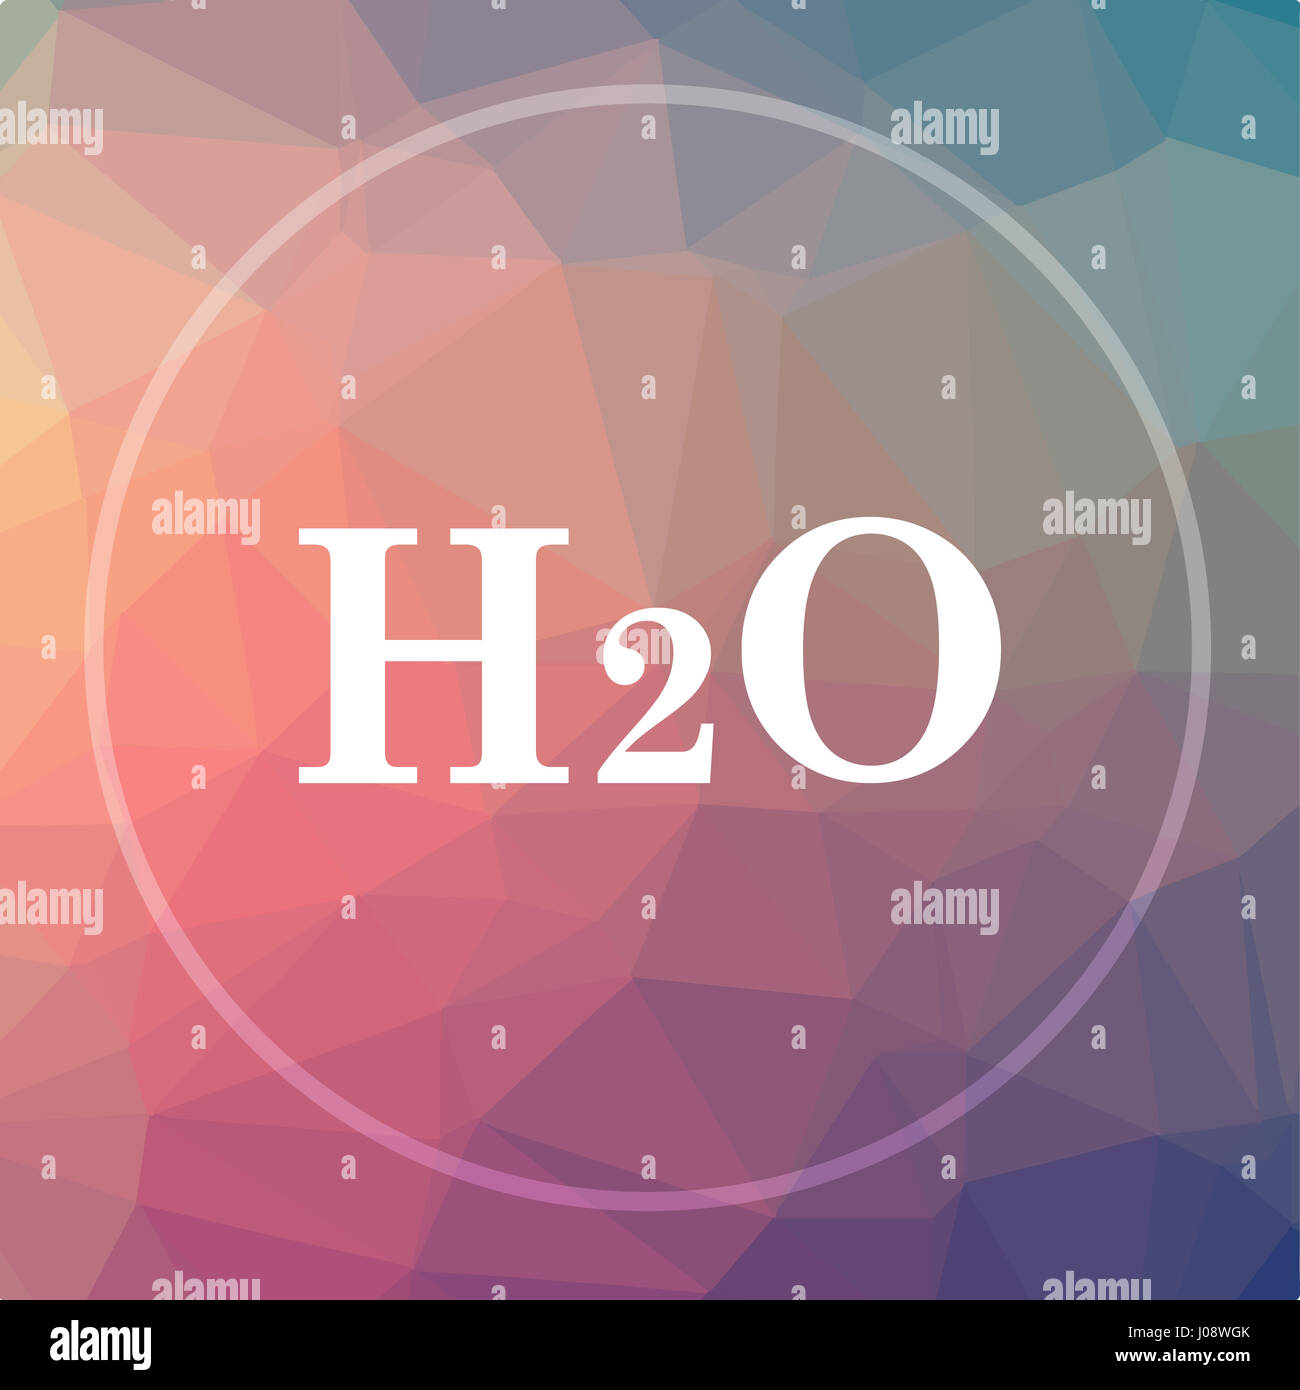 H2O icon. H2O website button on low poly background. Stock Photo